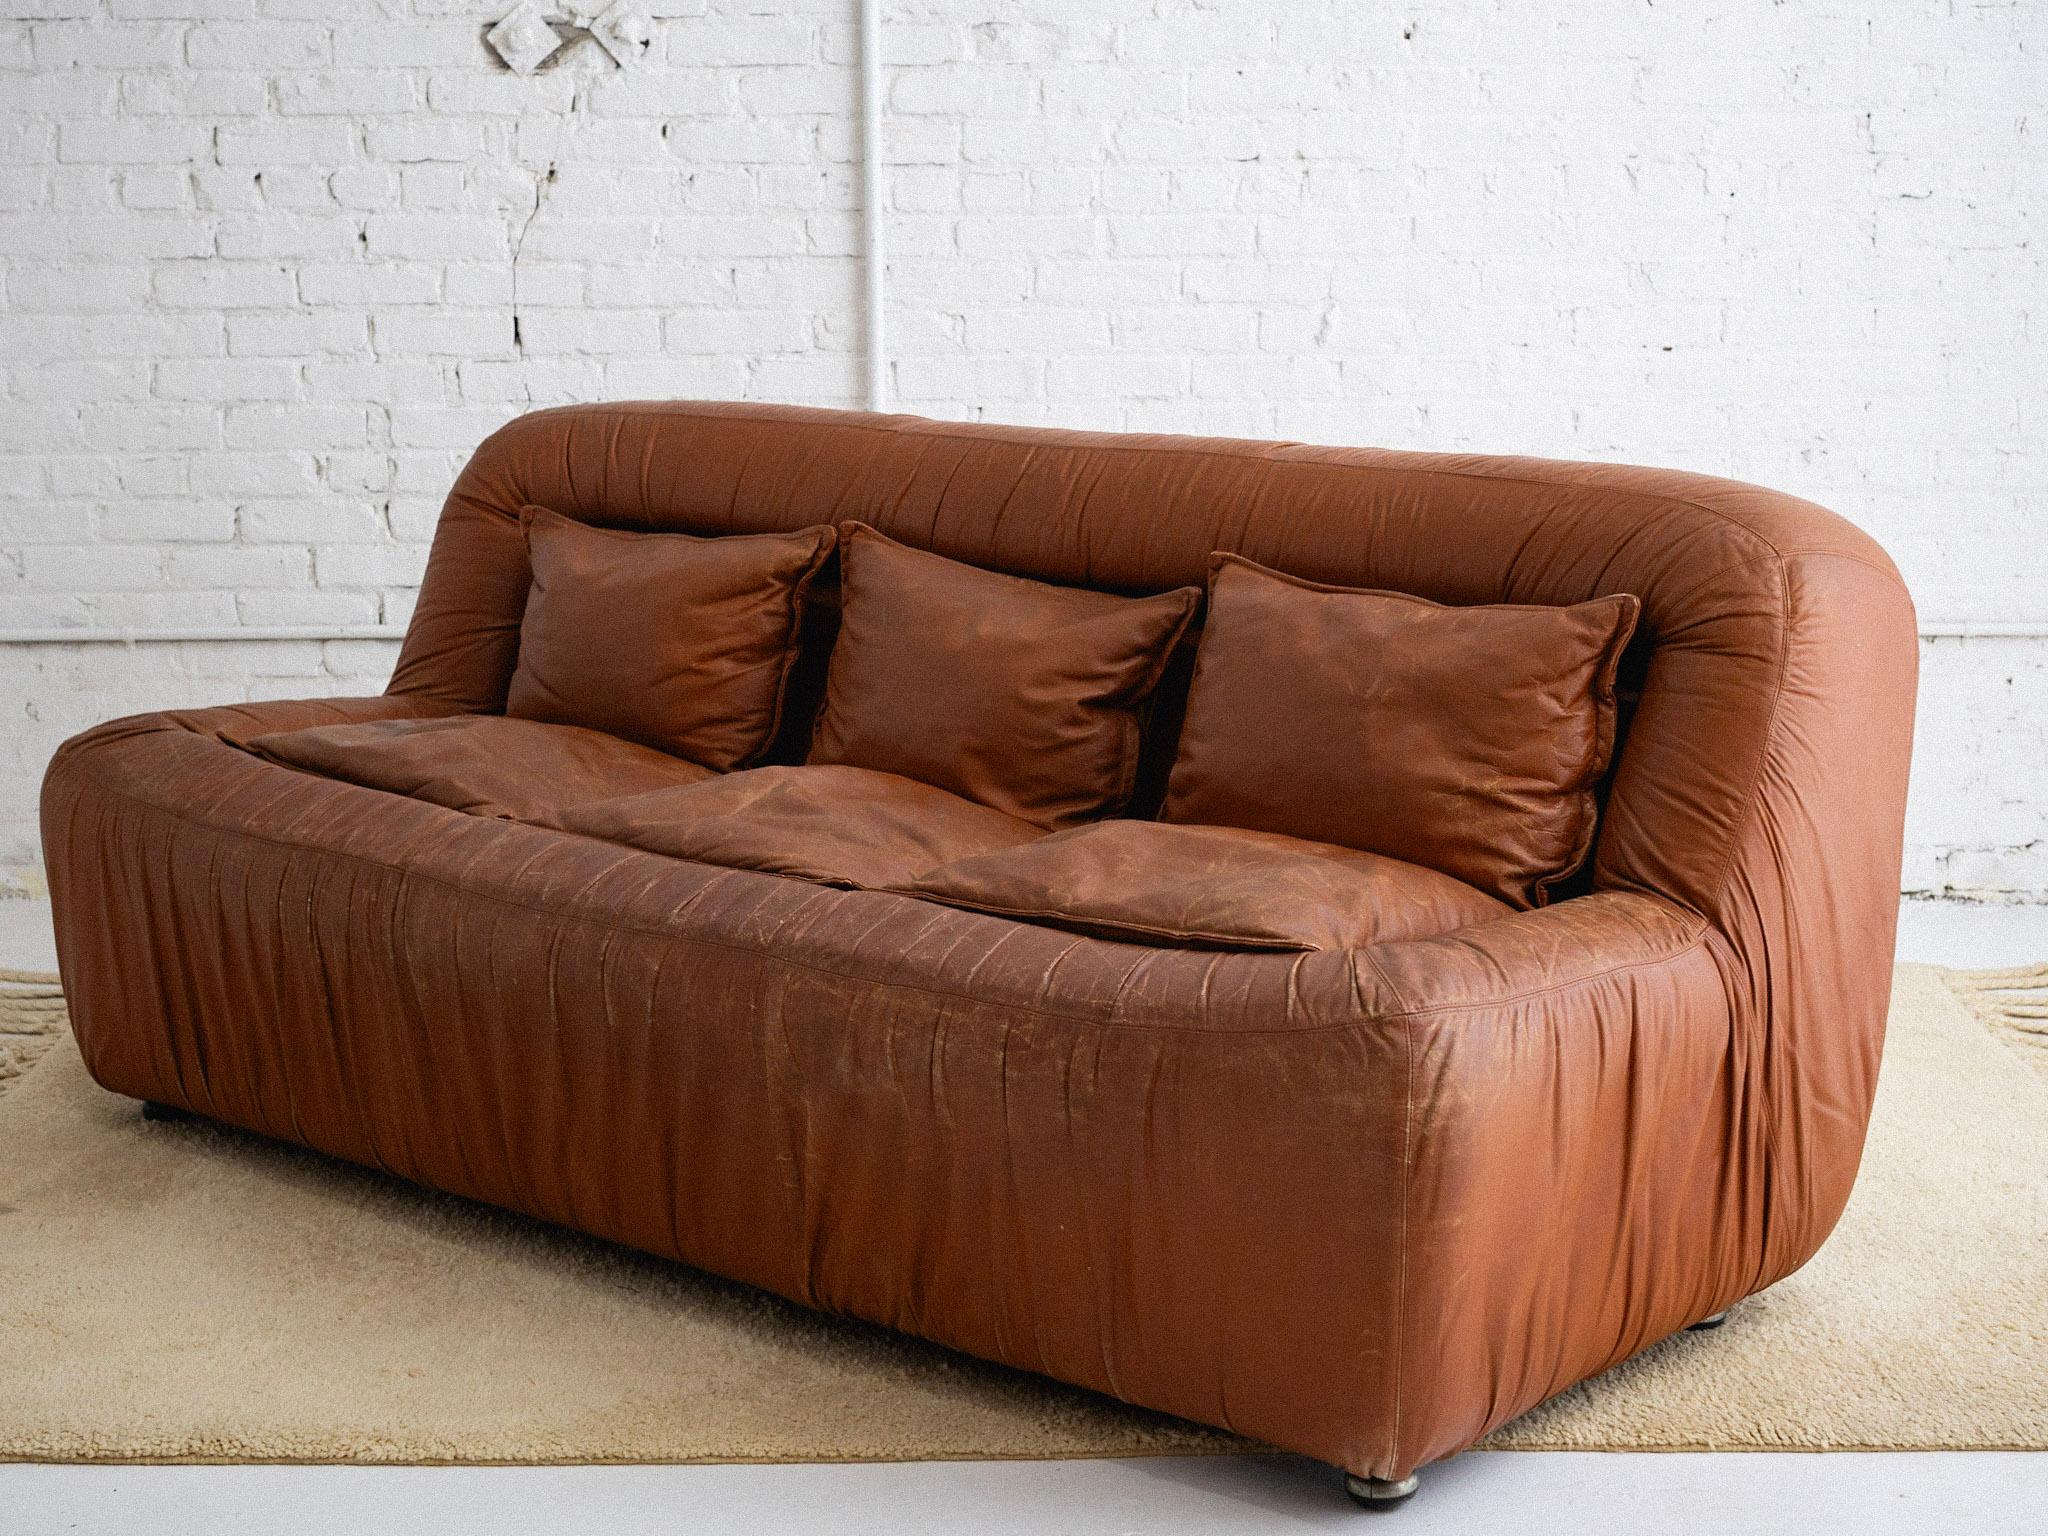 Italian Ruched Leather Sofa in the Style of De Pas, D'Urbino, Lomazzi In Fair Condition For Sale In Brooklyn, NY